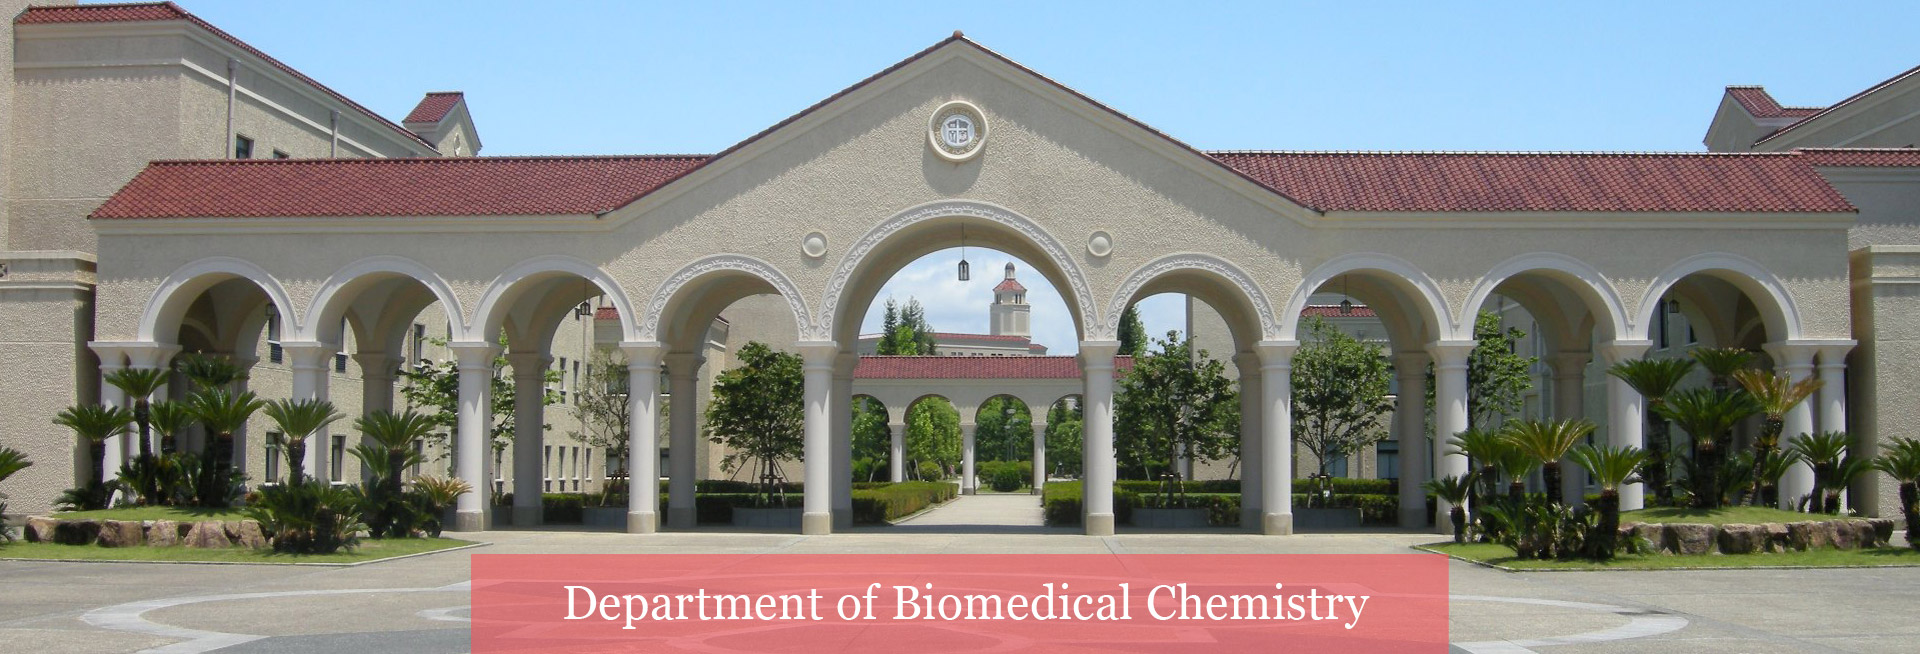 Department of Biomedical Chemistry